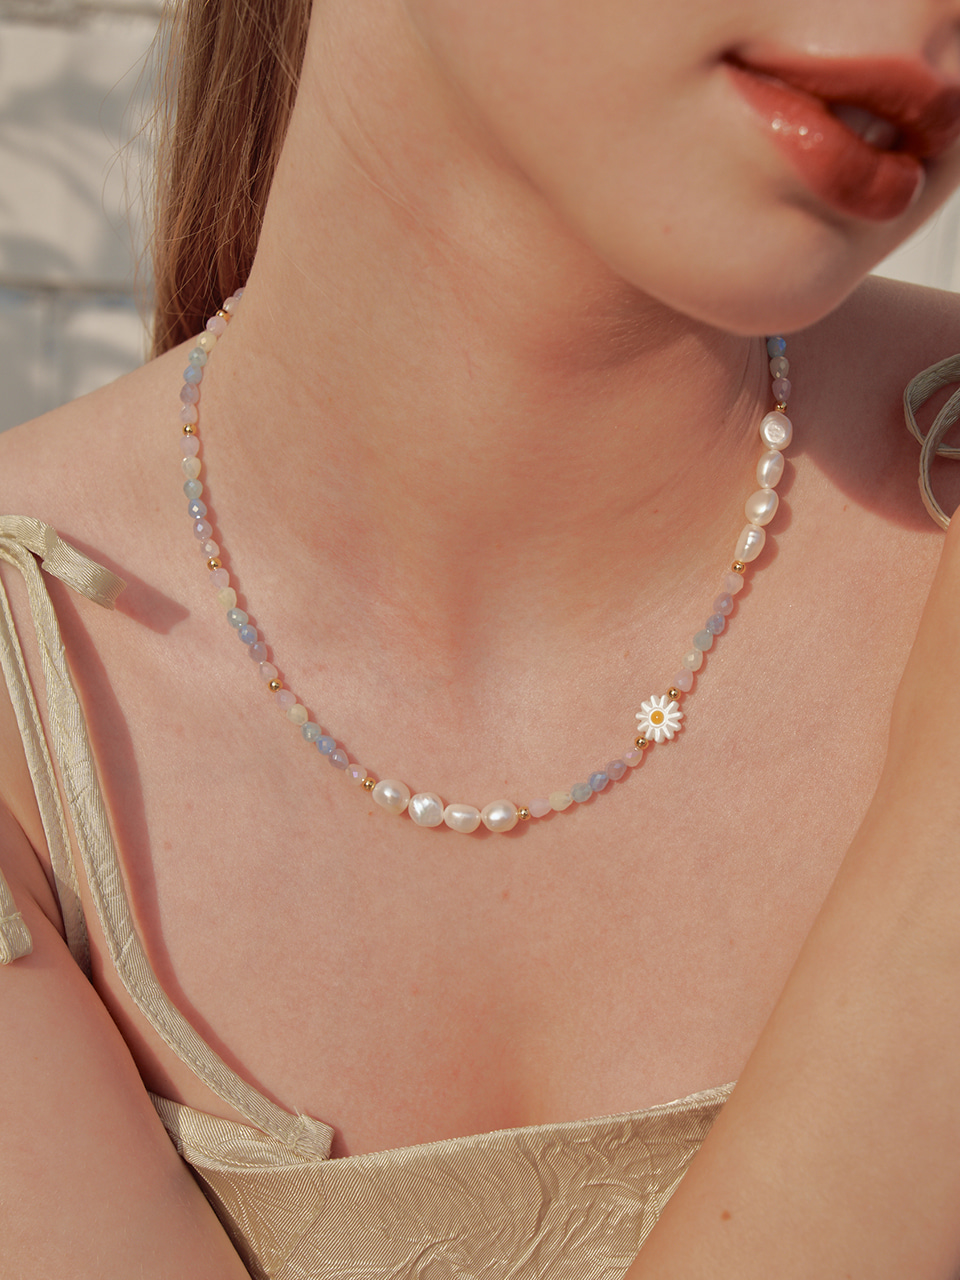 [NEW 컬러 출시][엔시티드림 런쥔, 에스파 닝닝 착용] pastel moment daisy necklace